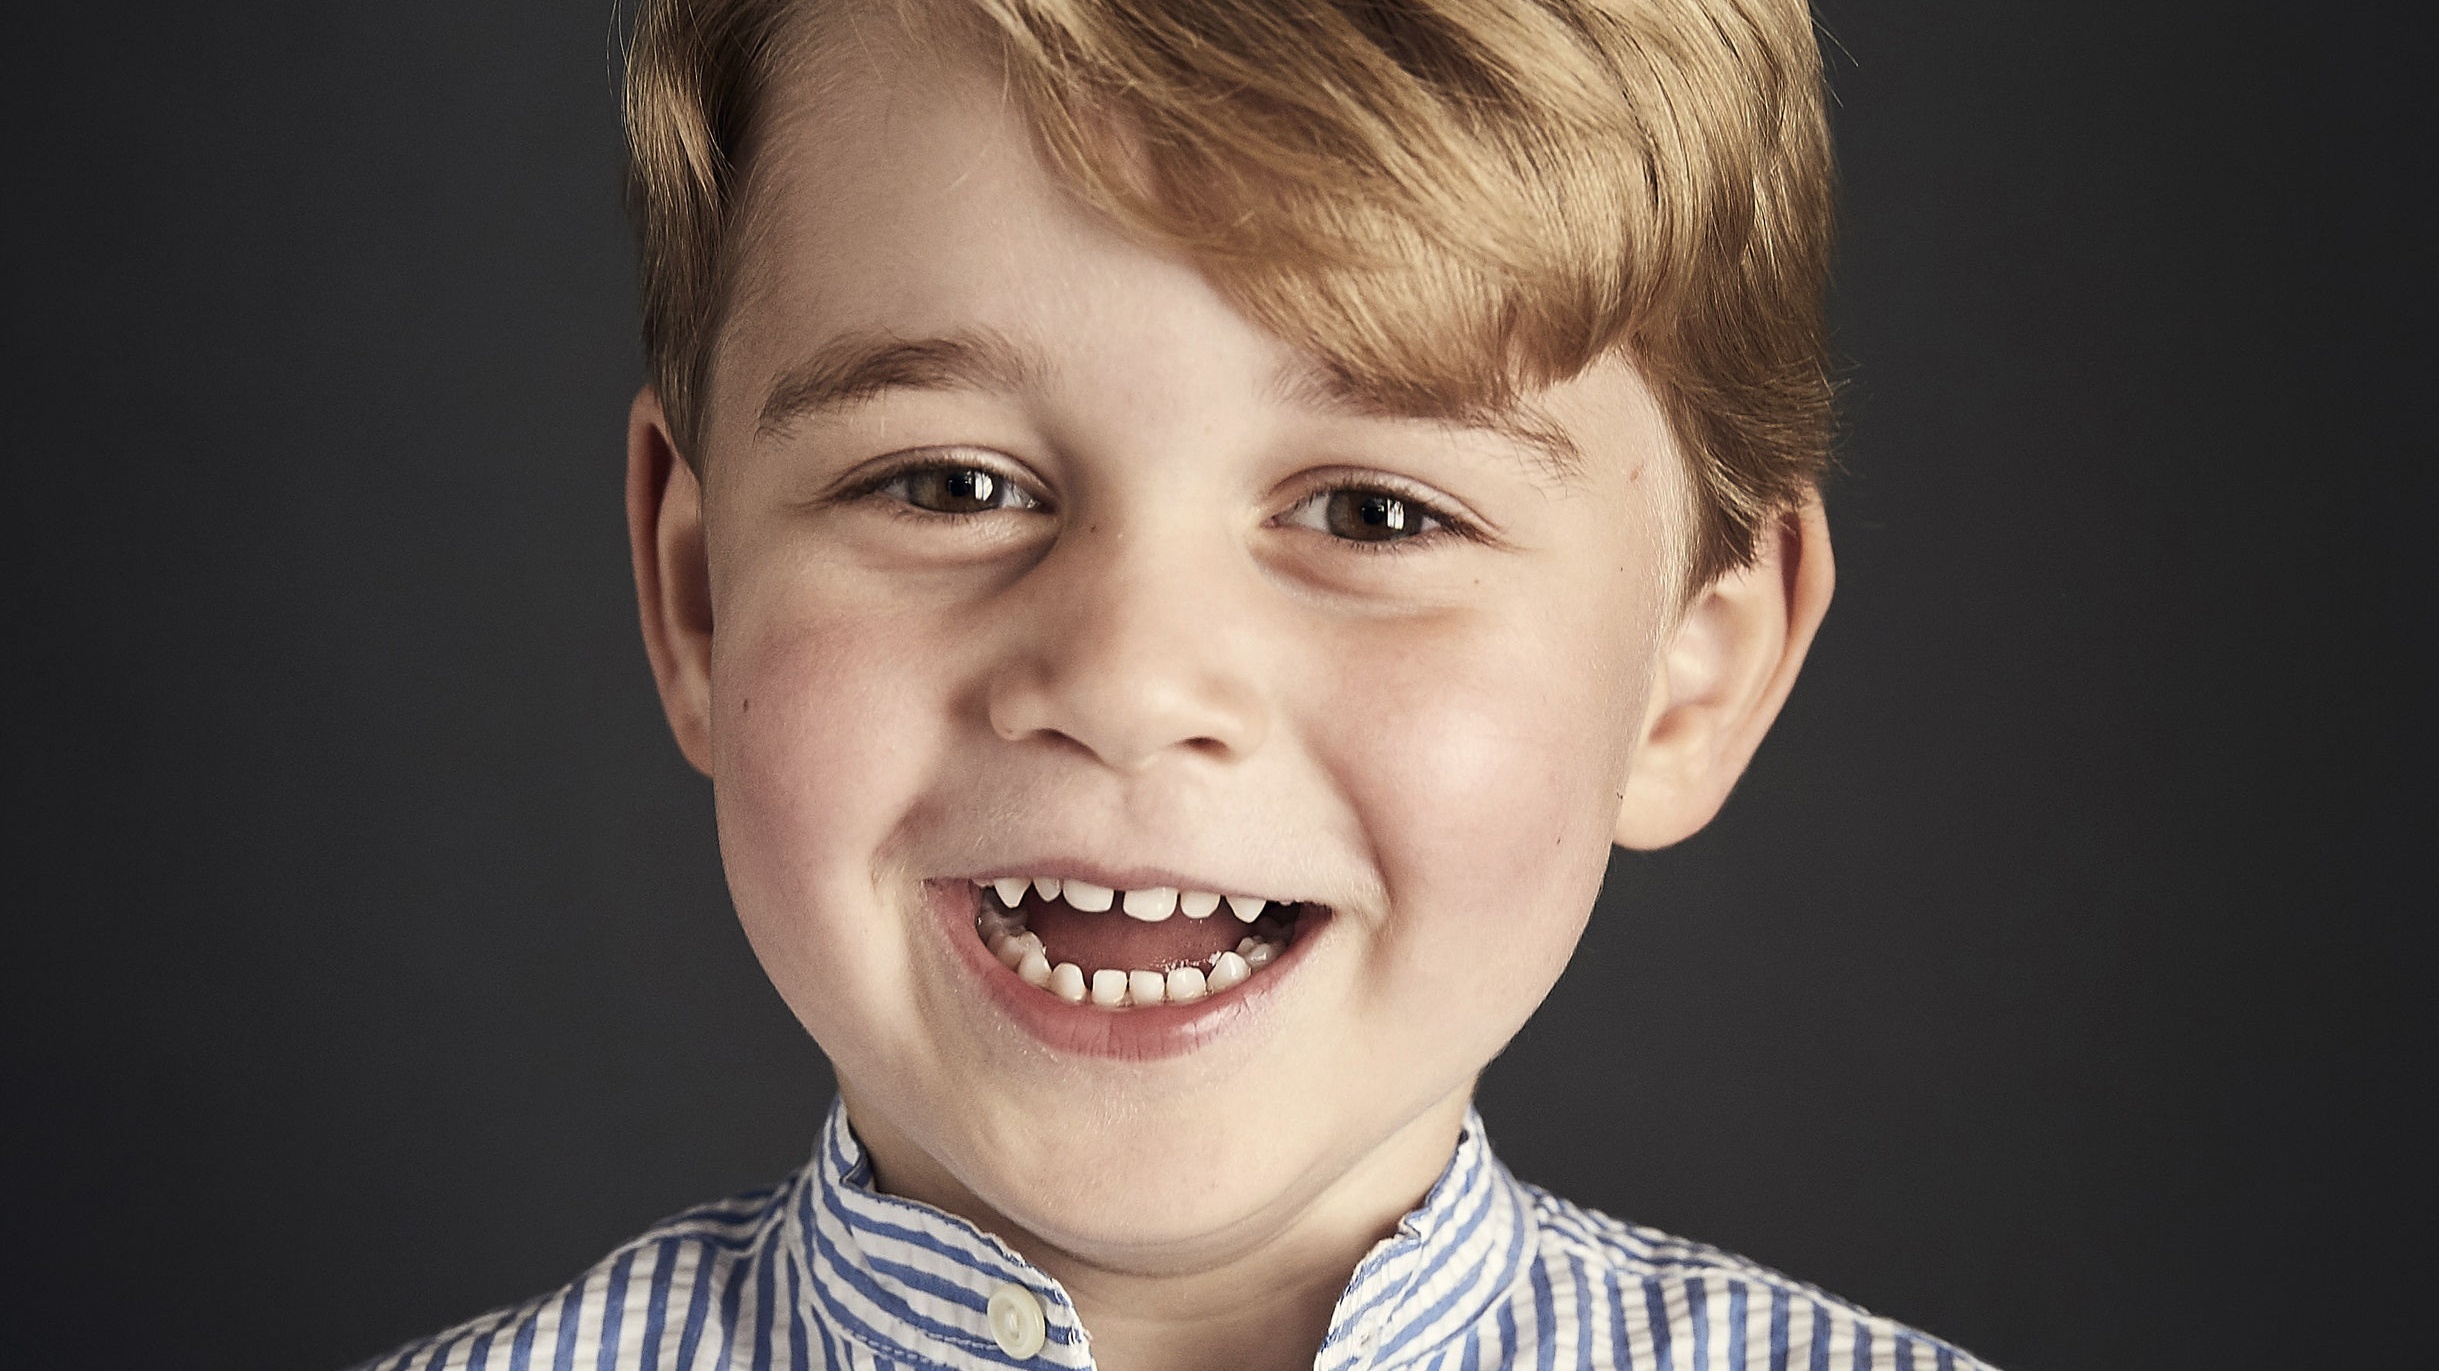 The Duke and Duchess of Cambridge have released a new picture of Prince George who celebrates his fourth birthday on Saturday (Chris Jackson/Getty Images/PA)